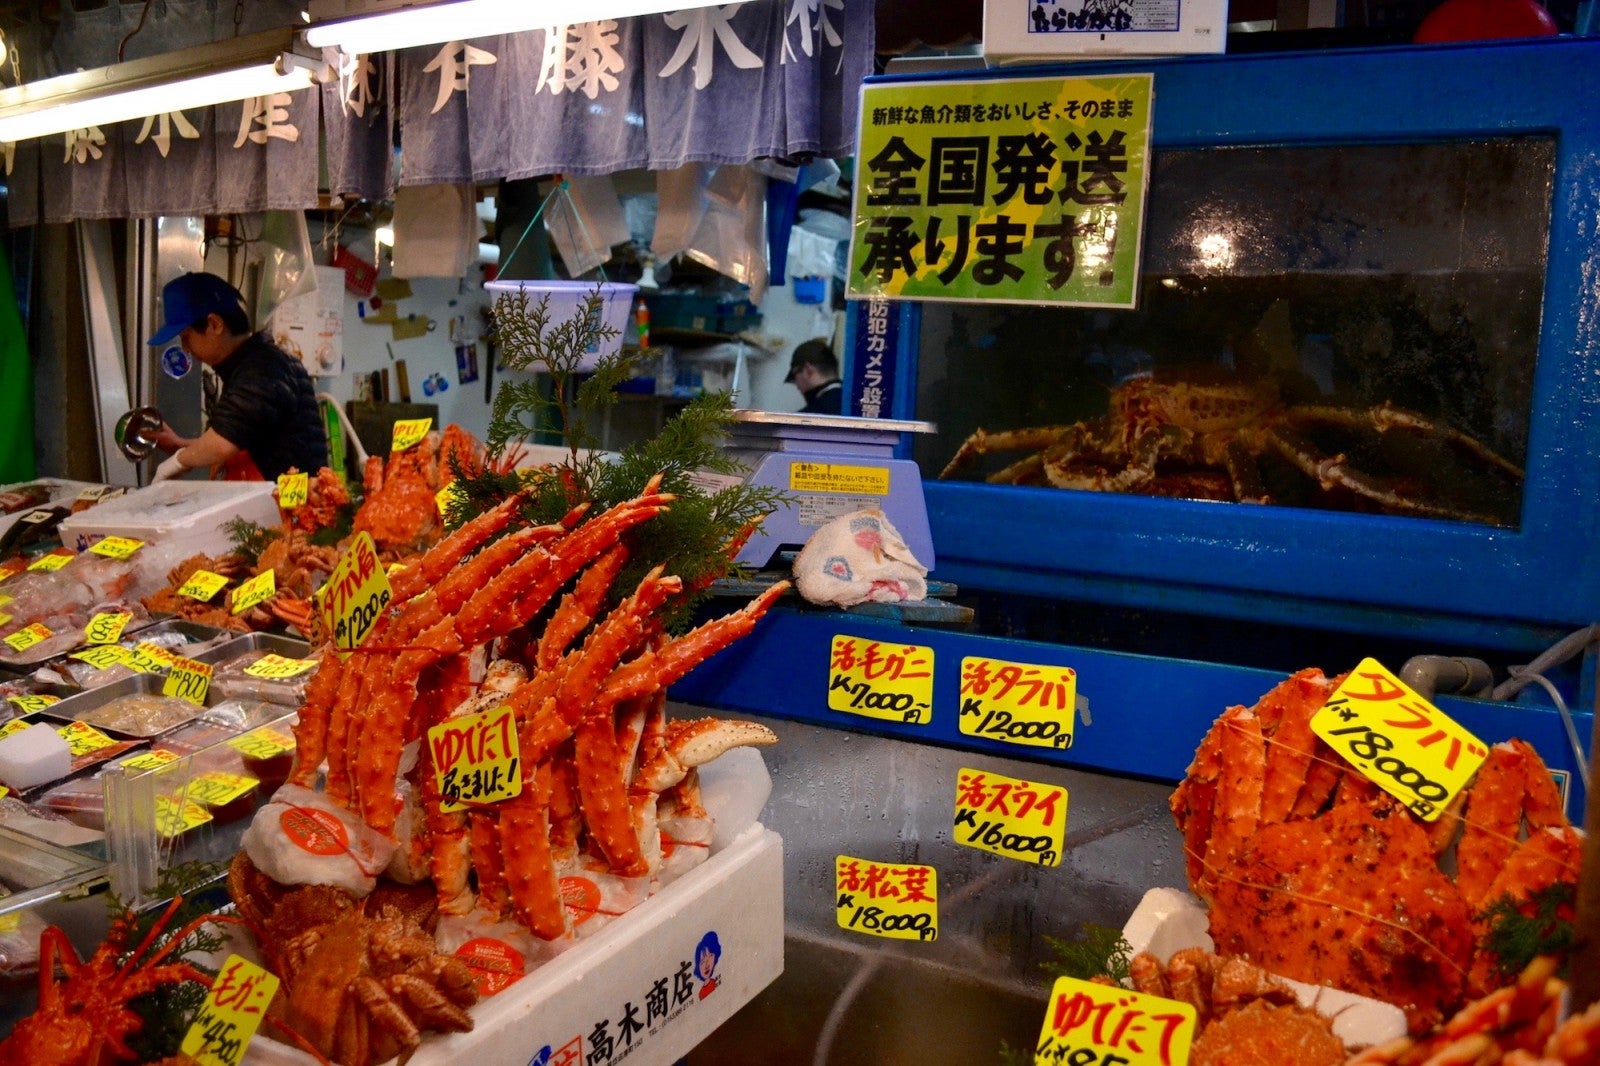 You Can No Longer Visit Historical Tsukiji Market in Tokyo As They Are Closing on 6 Oct 2018! - WORLD OF BUZZ